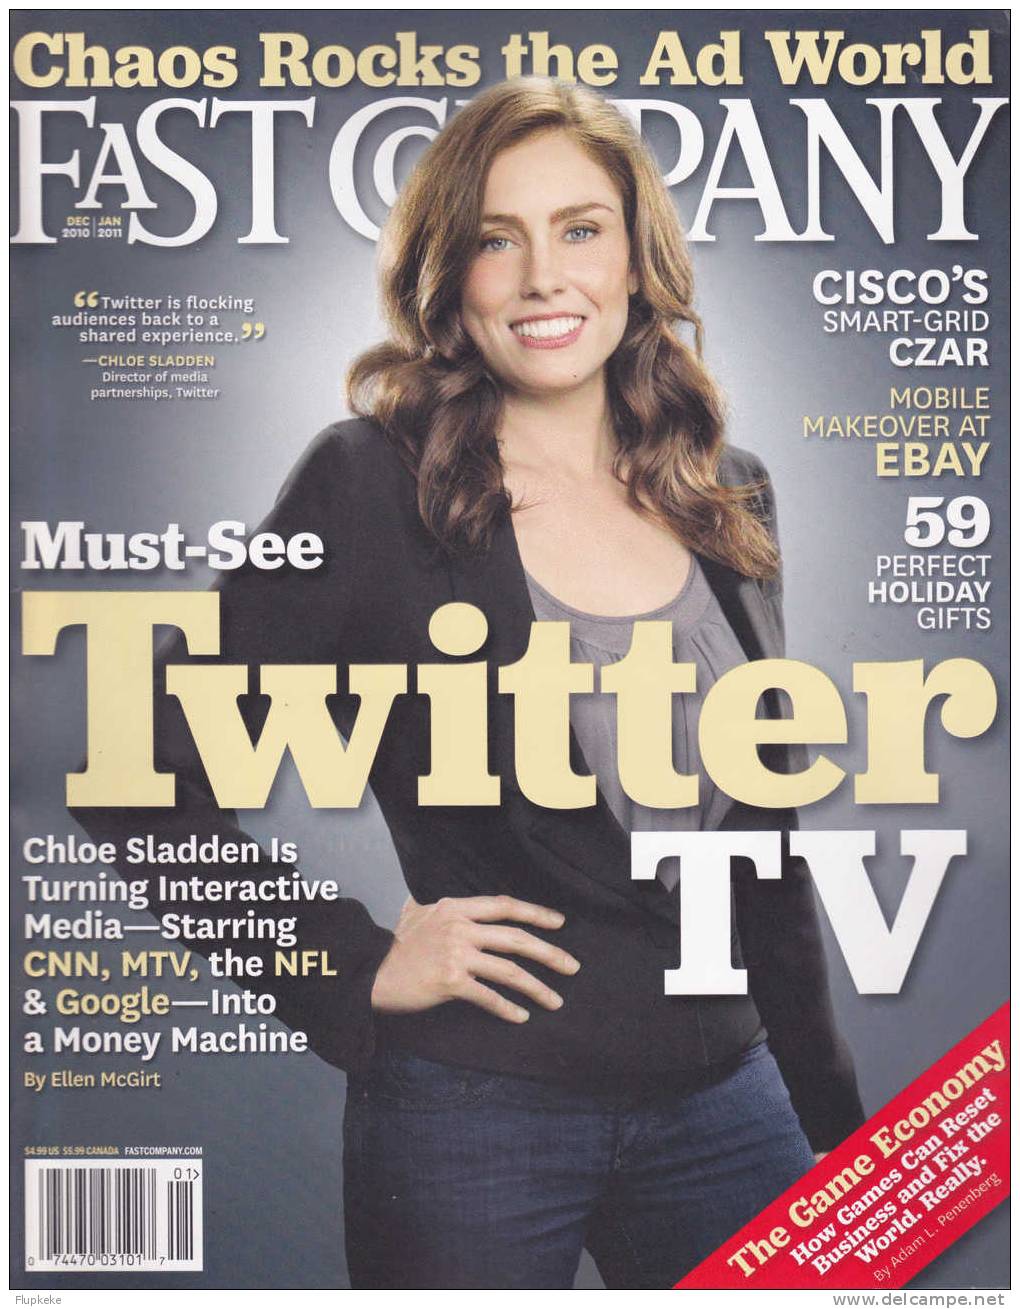 Fast Company 151 January 2011 Must-See Twitter Tv - Business/ Gestion